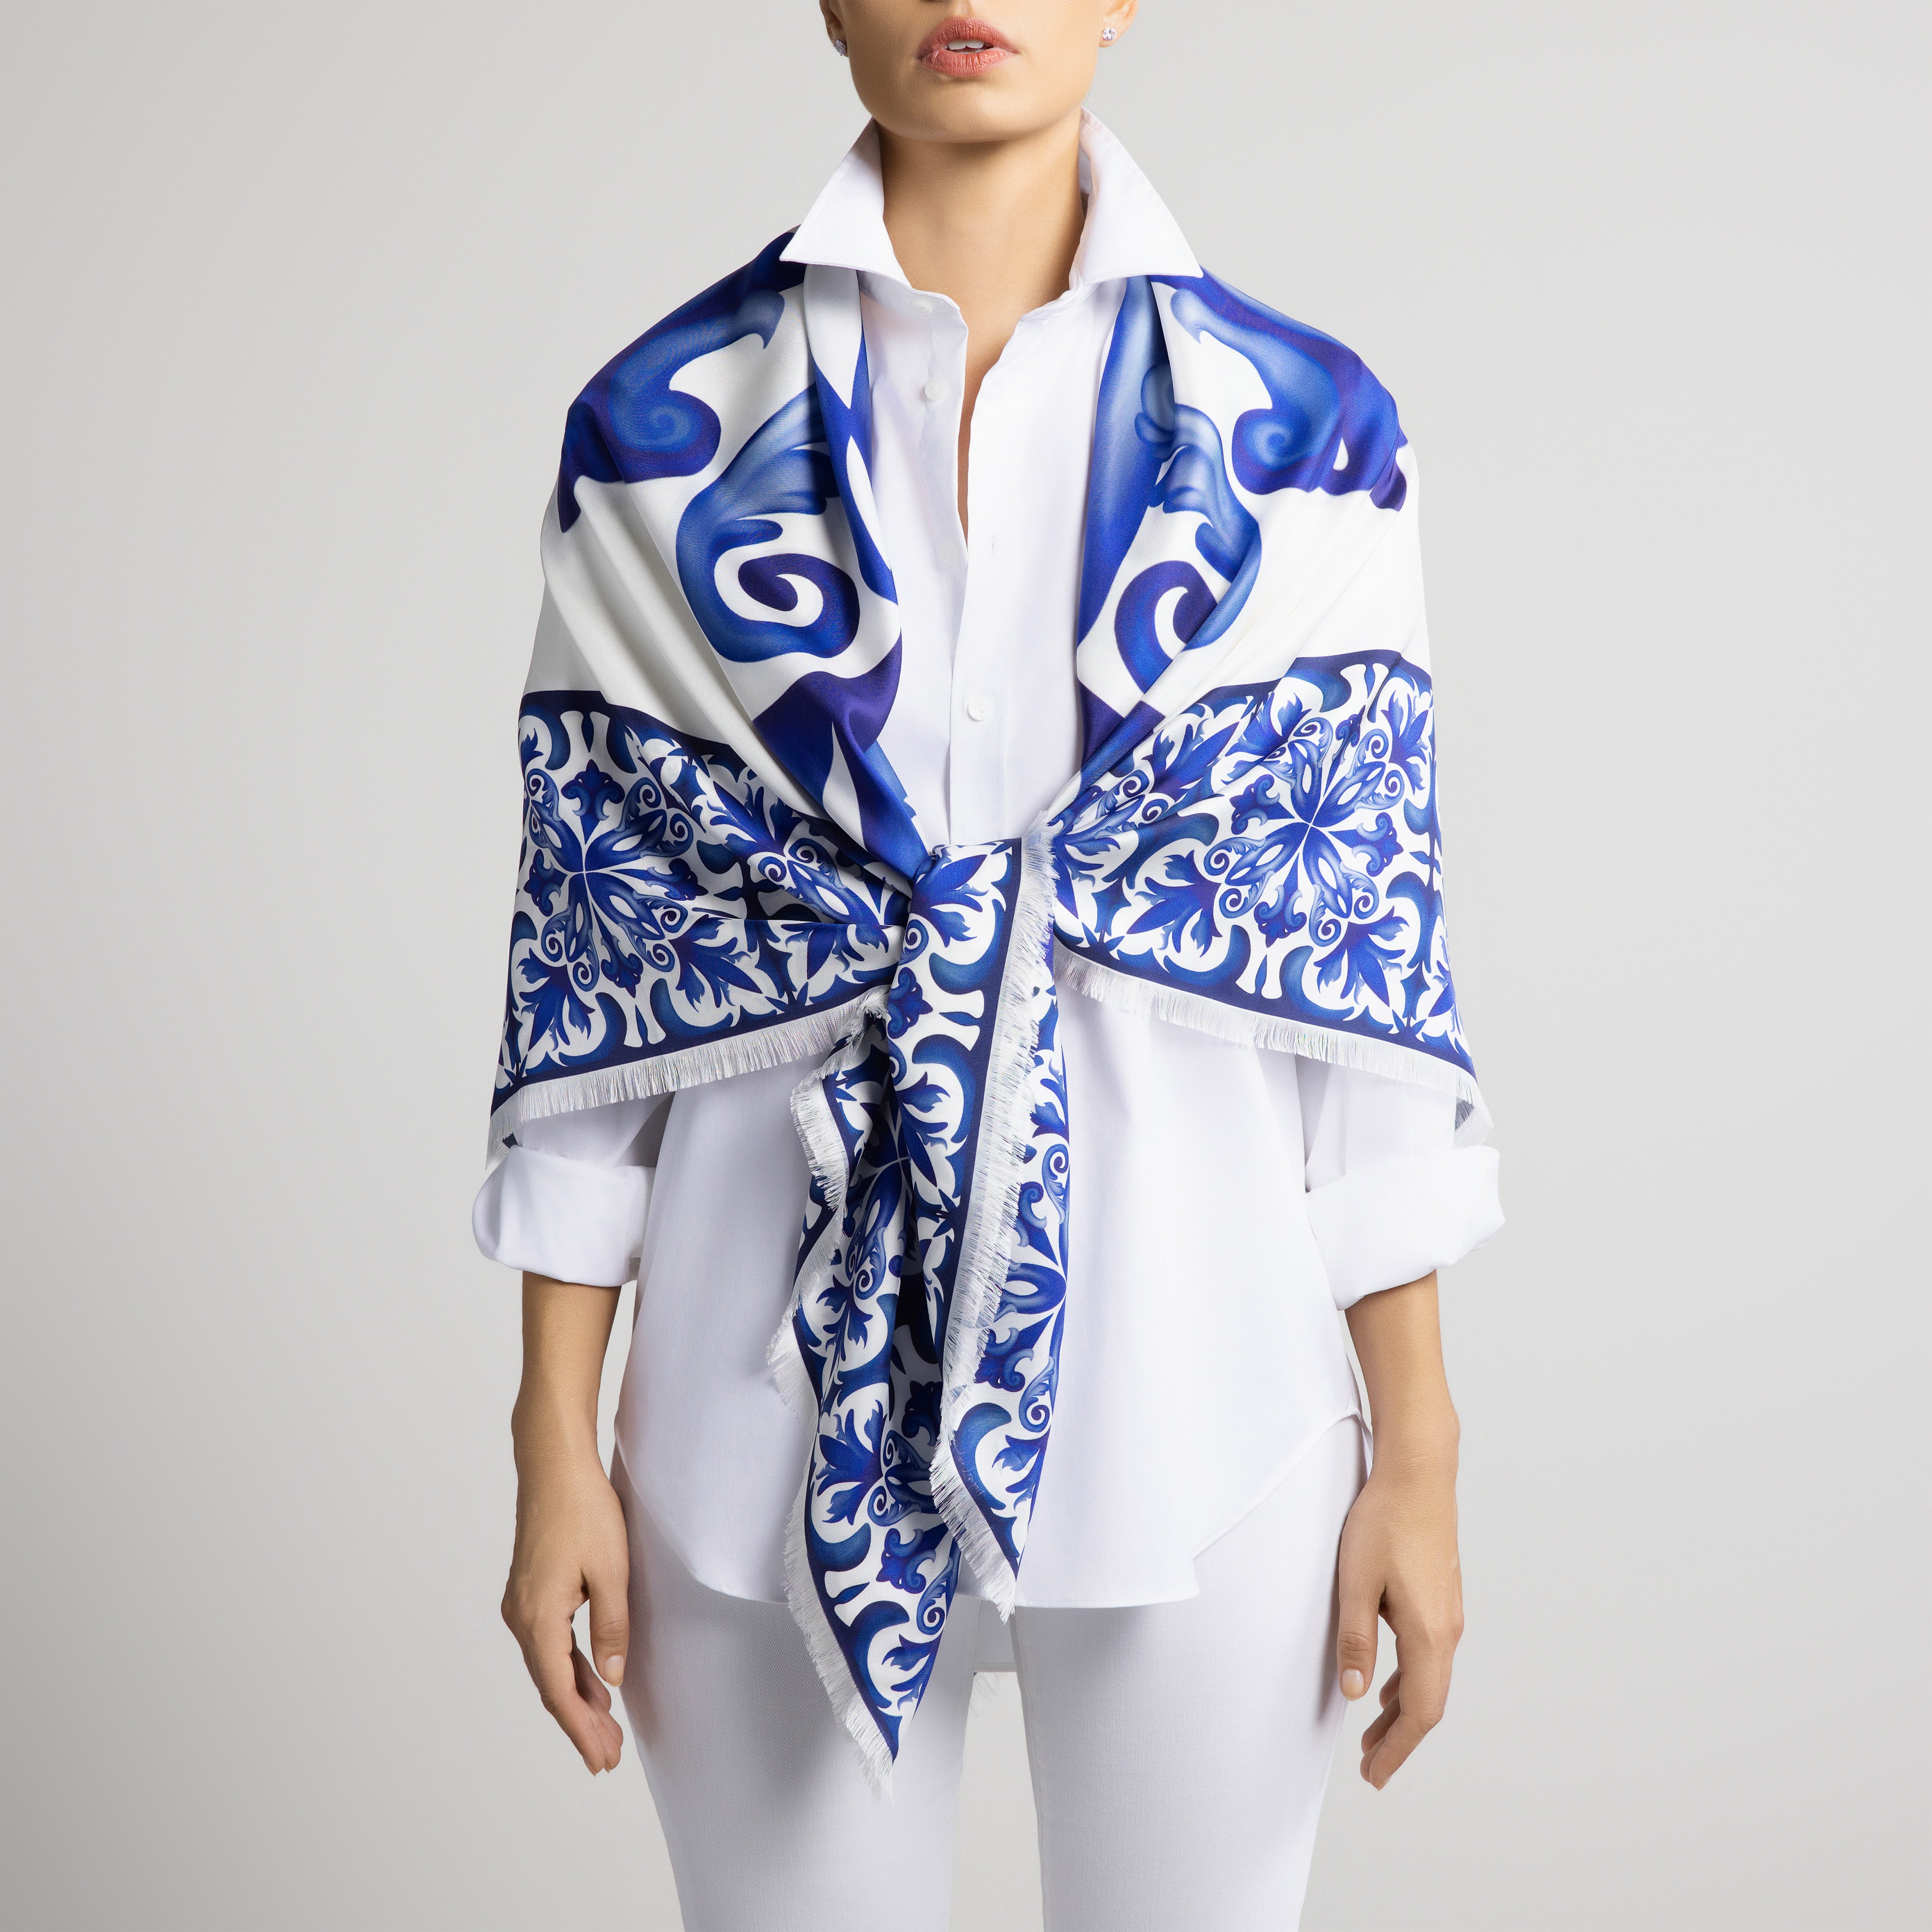 Porto Grande Silk Scarf in White with Hand-Feathered Edges